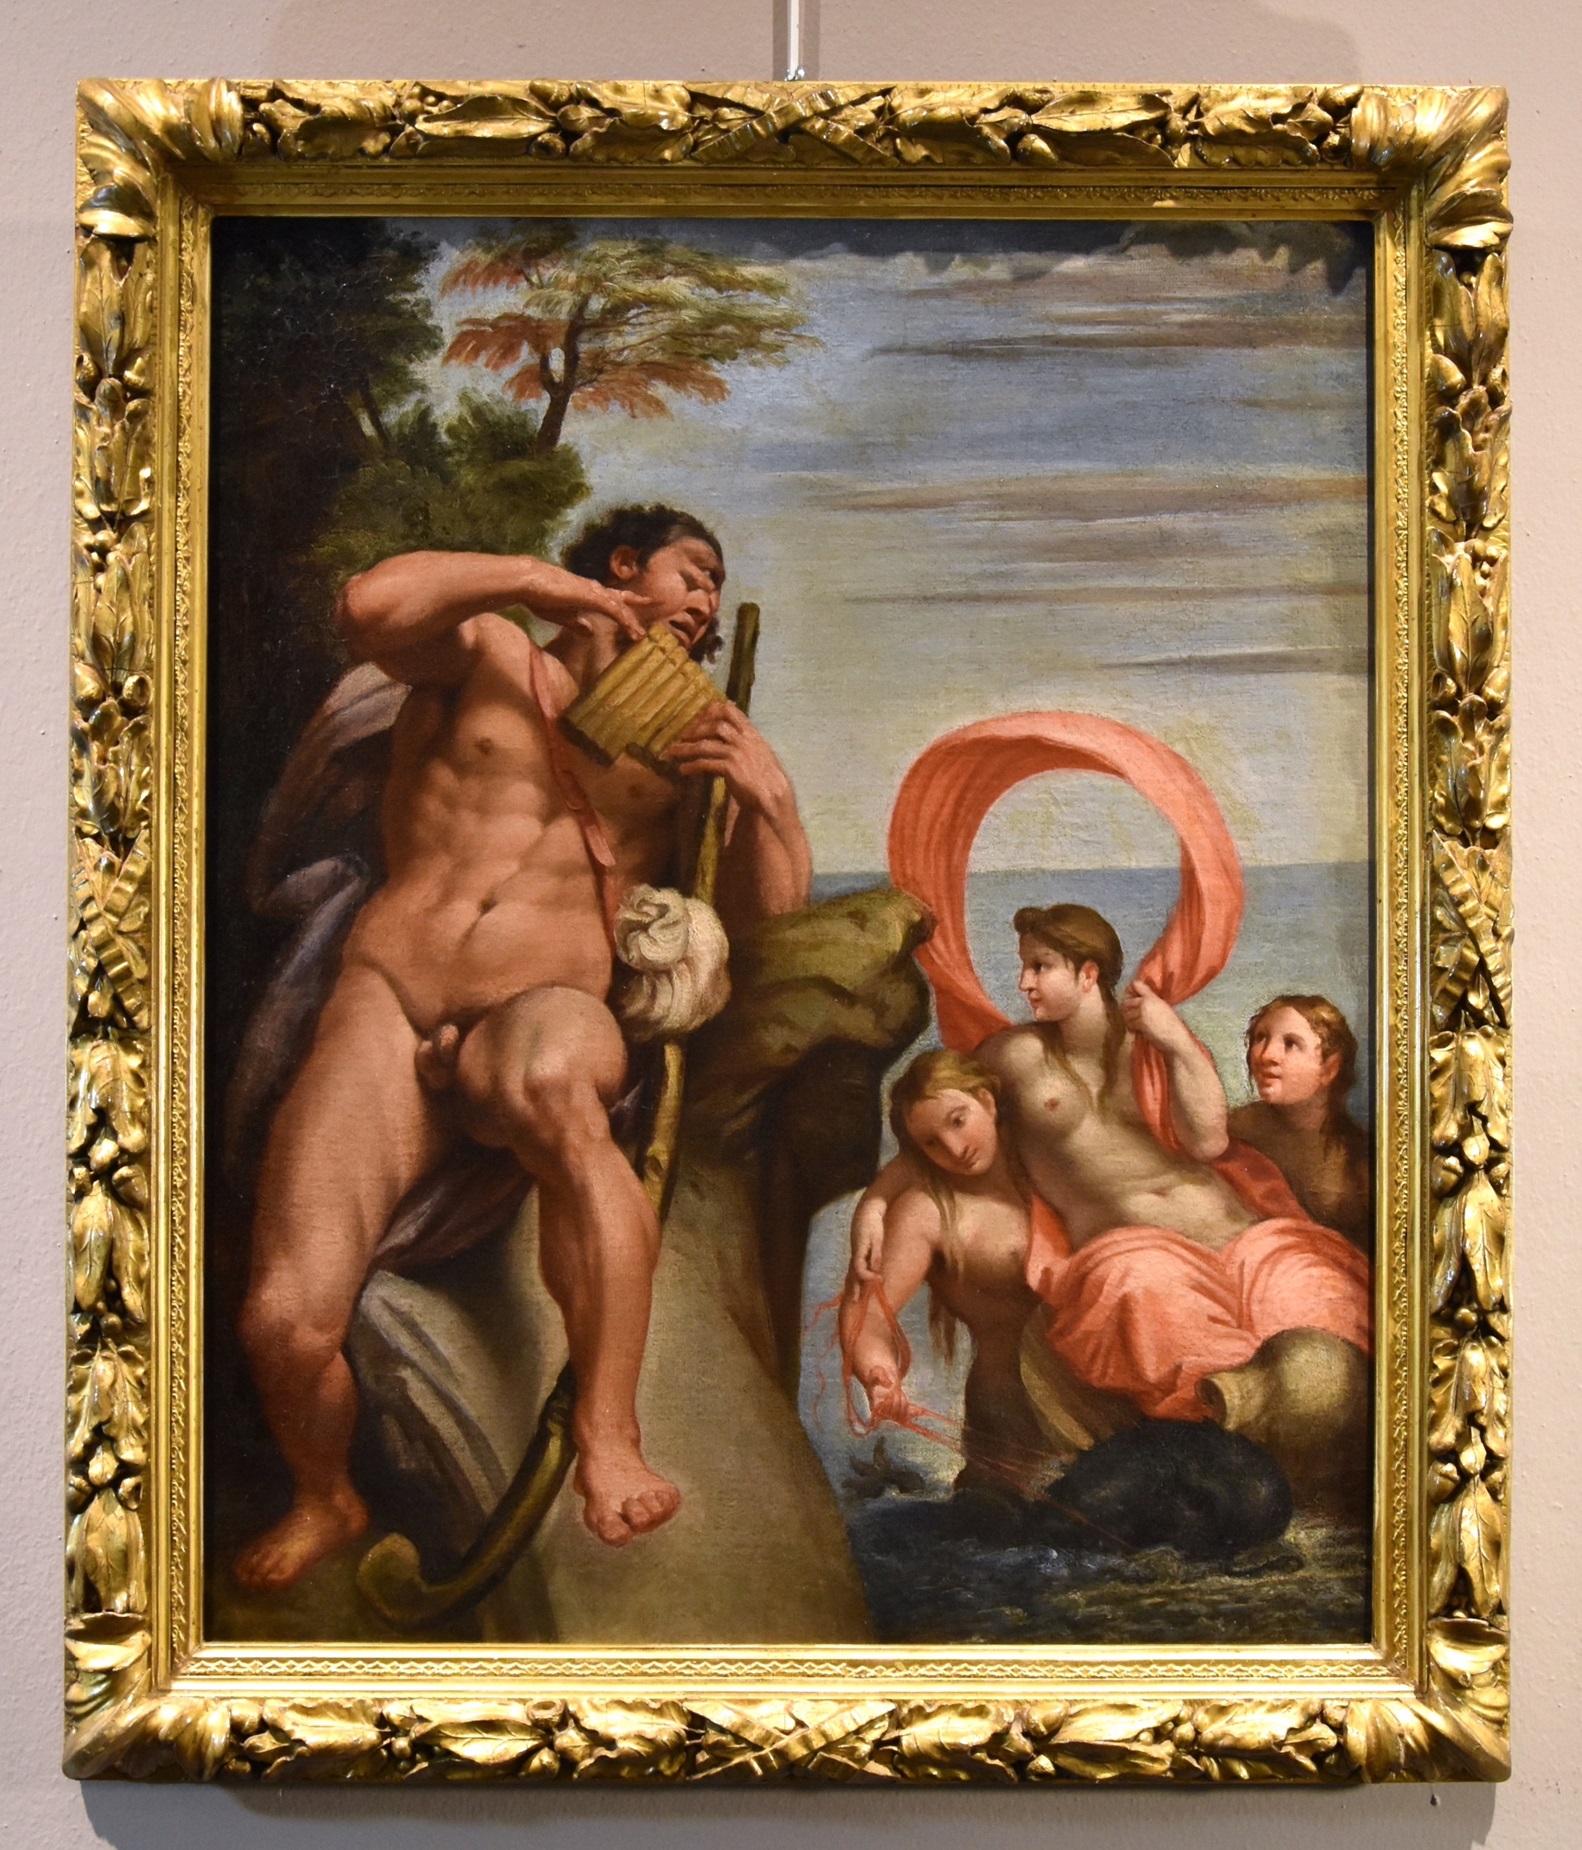 Polyphemus Galatea Carracci Paint 17th Century Oil on canvas Old master Italy - Painting by Annibale Carracci (bologna, 1560 - Rome, 1609)